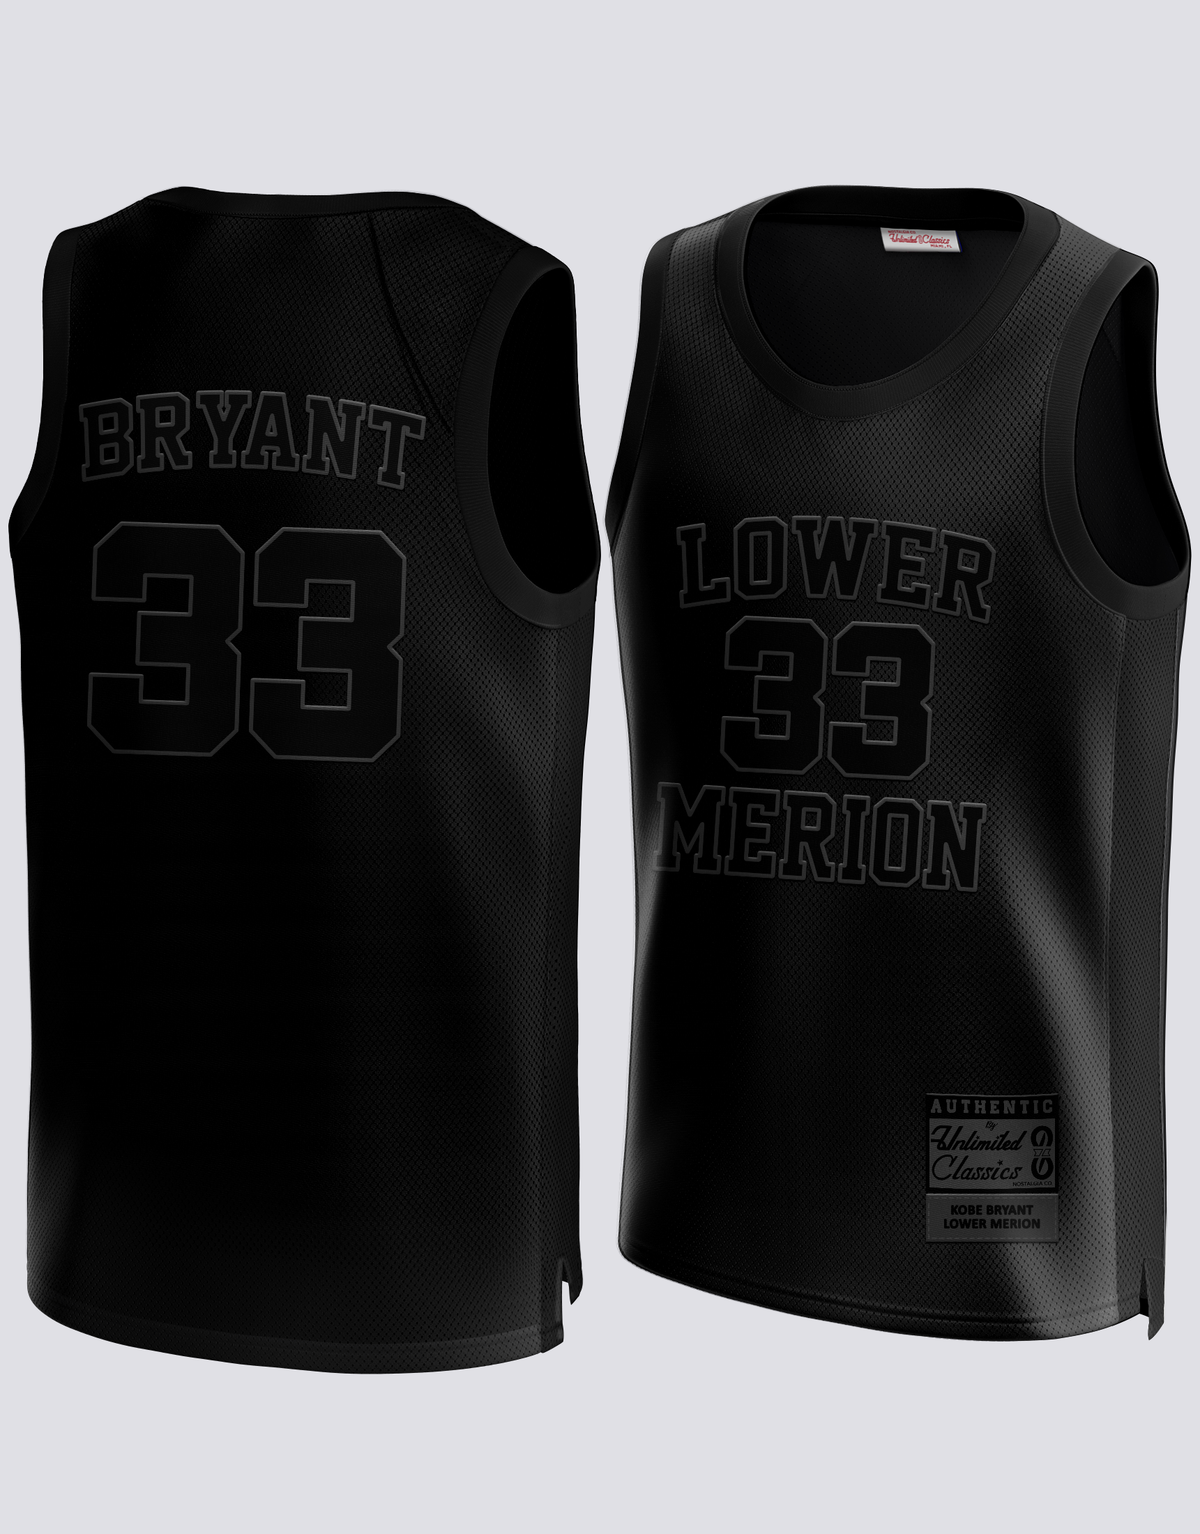 Kobe Bryant #33 Lower Merion Limited Edition Jersey